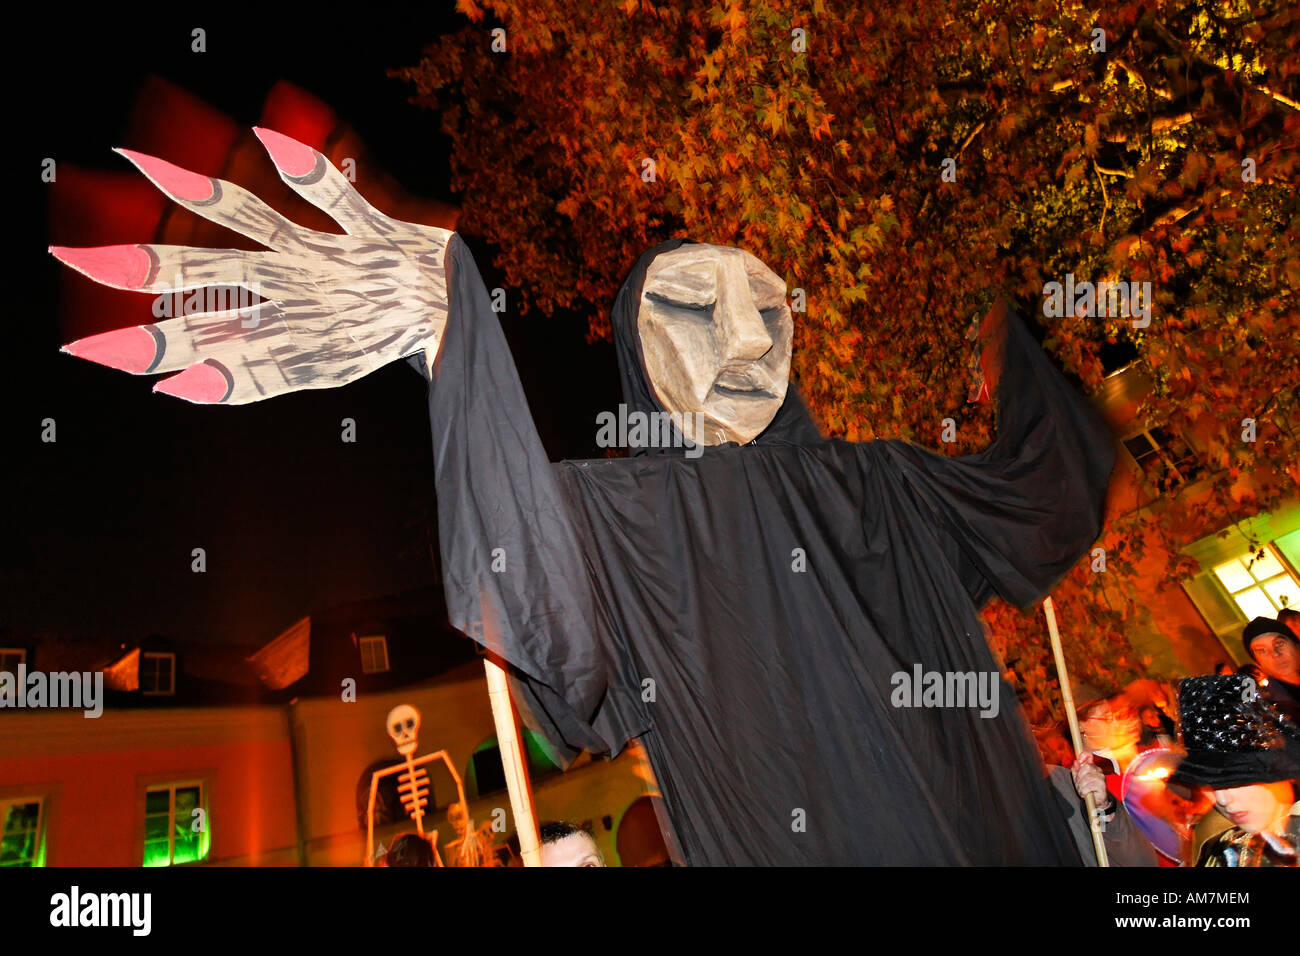 Hand-made ghost figure, Halloween event for children, theatre museum Duesseldorf, NRW, Germany Stock Photo